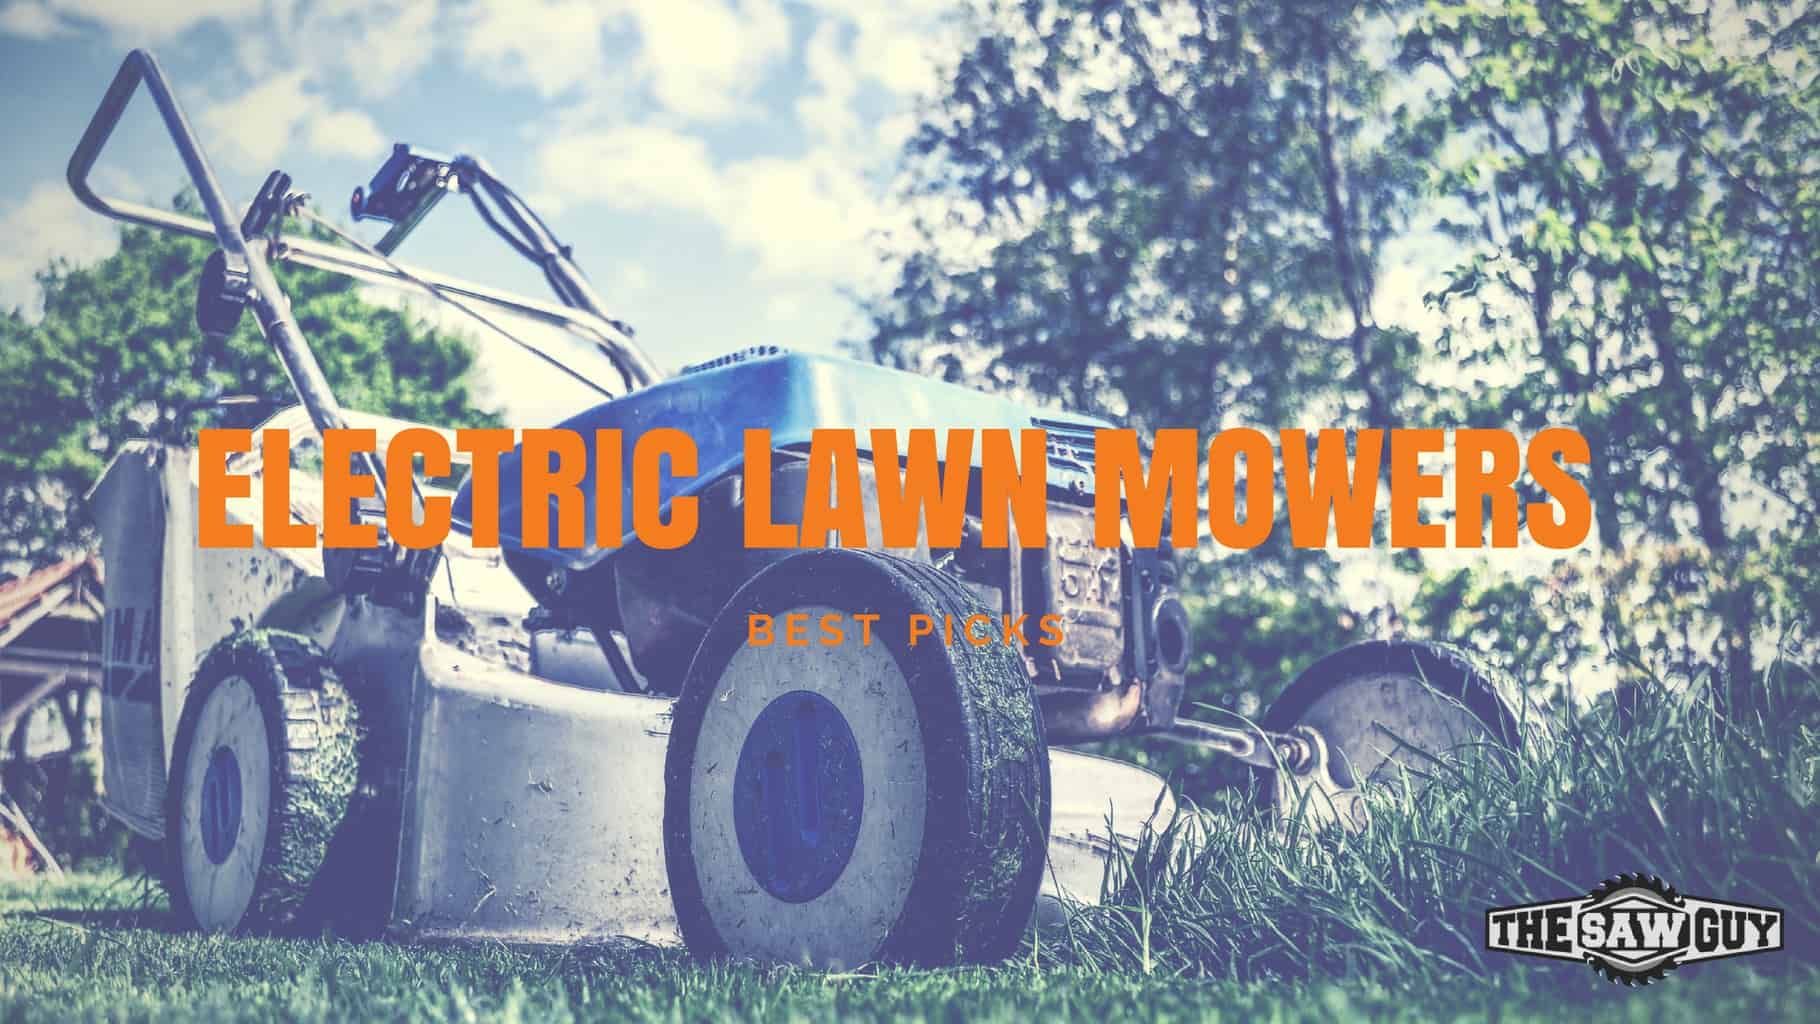 Best electric lawn mower for the money